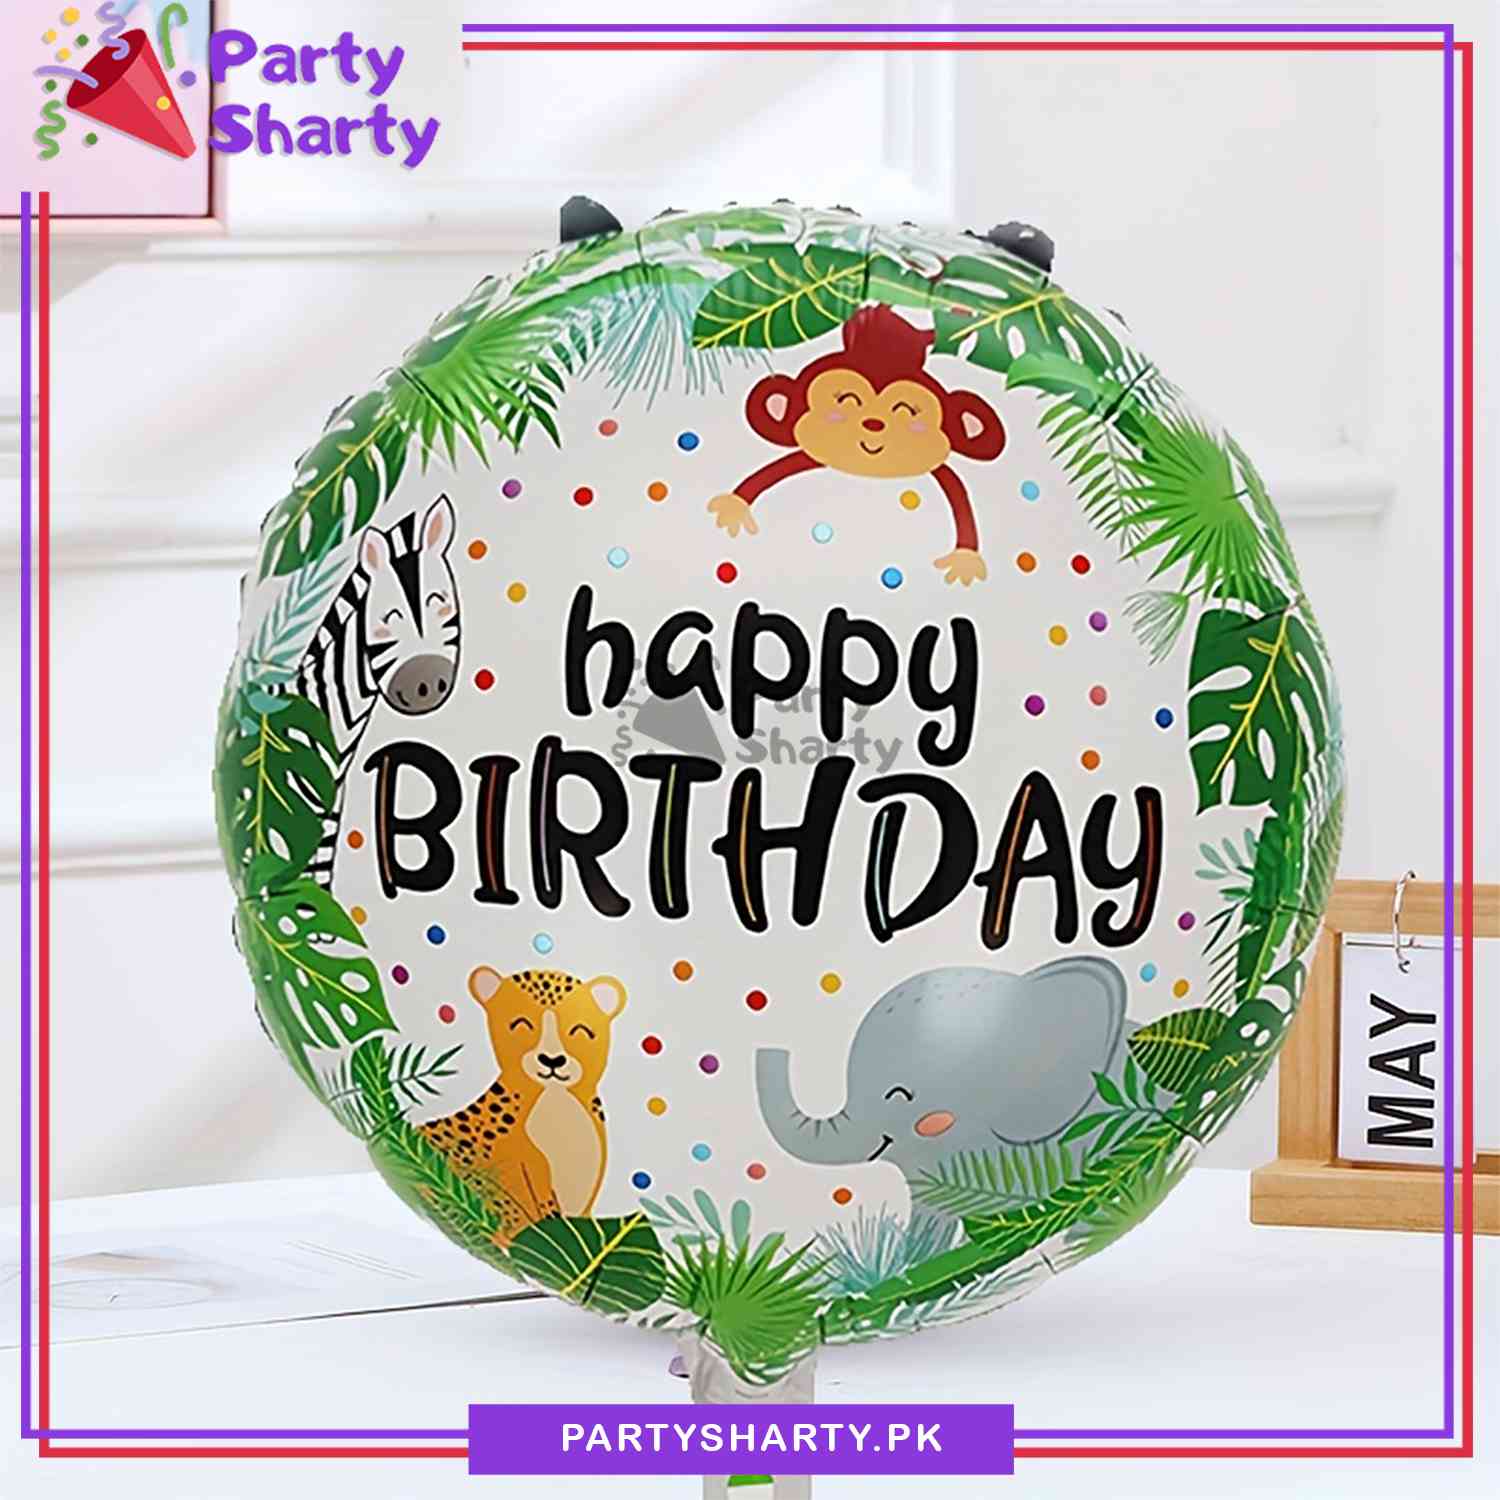 D-2 Jungle Theme Round Shaped Foil Balloon for Birthday Celebration and Decoration